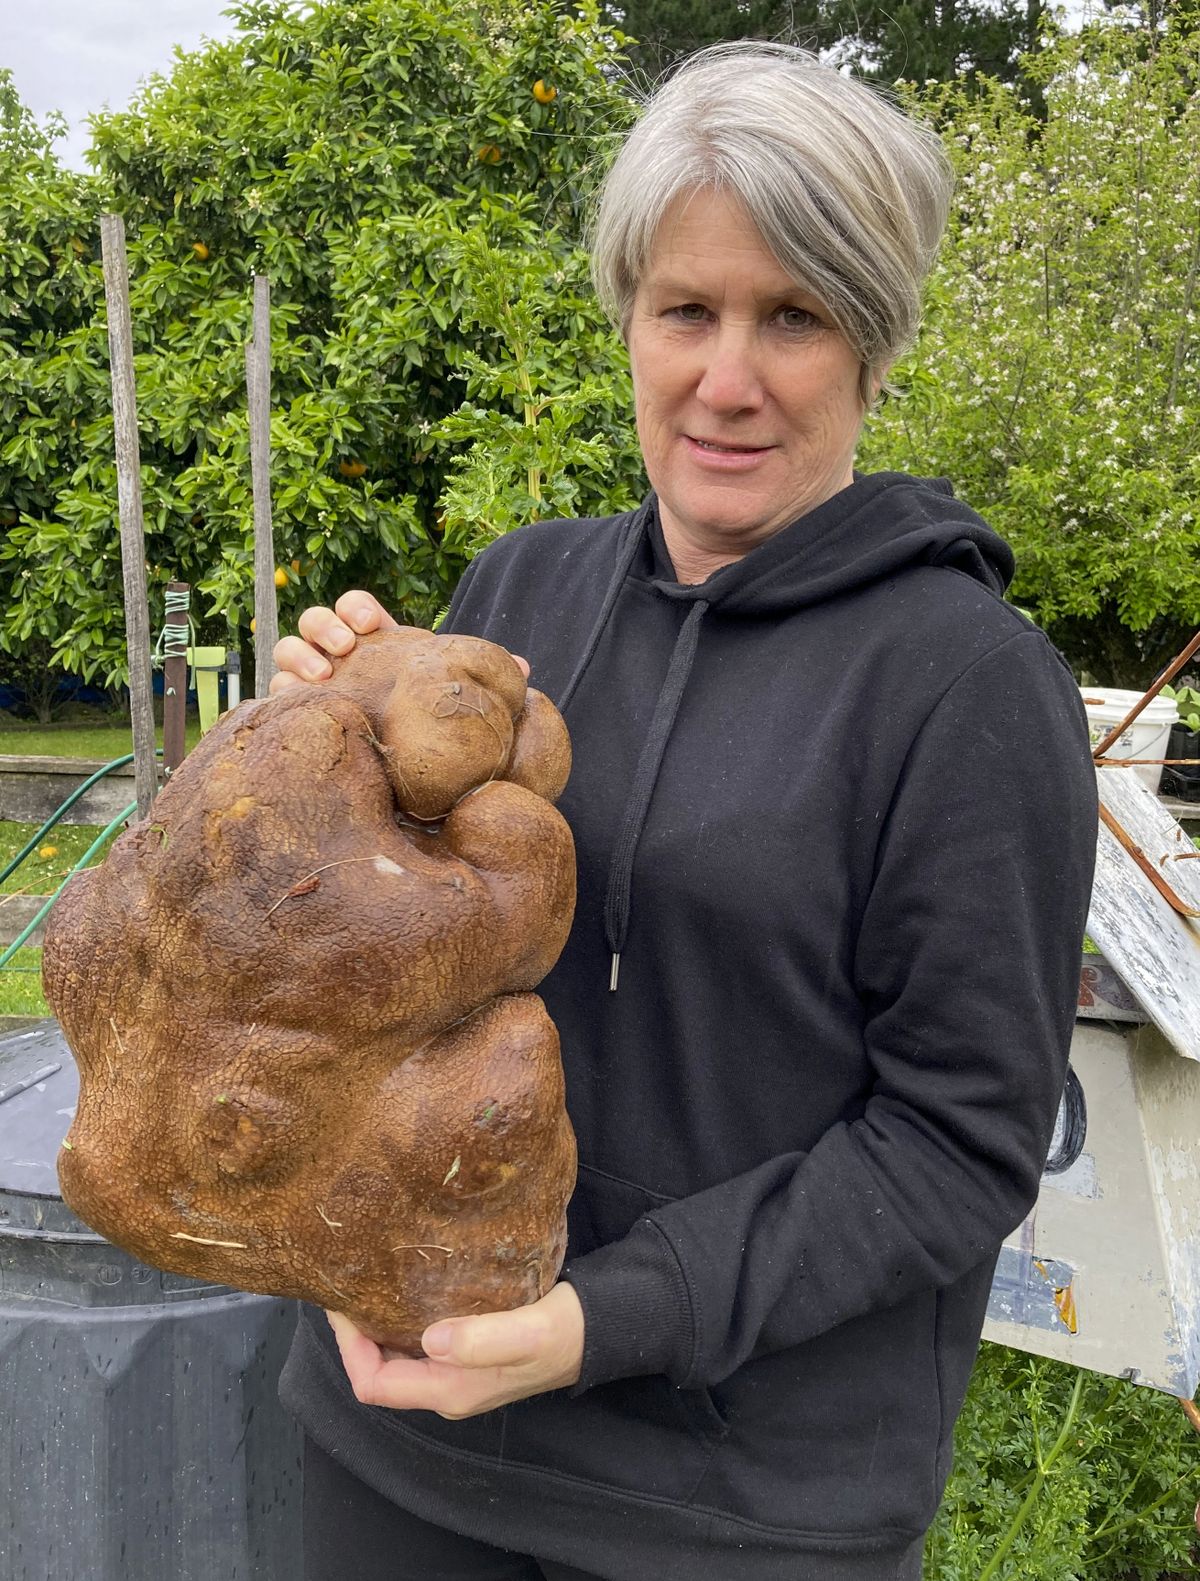 Donna Craig-Brown holds a large potato dug from her garden at her home near Hamilton, New Zealand on Wednesday. The potato weighs 17 pounds.  (HONS)